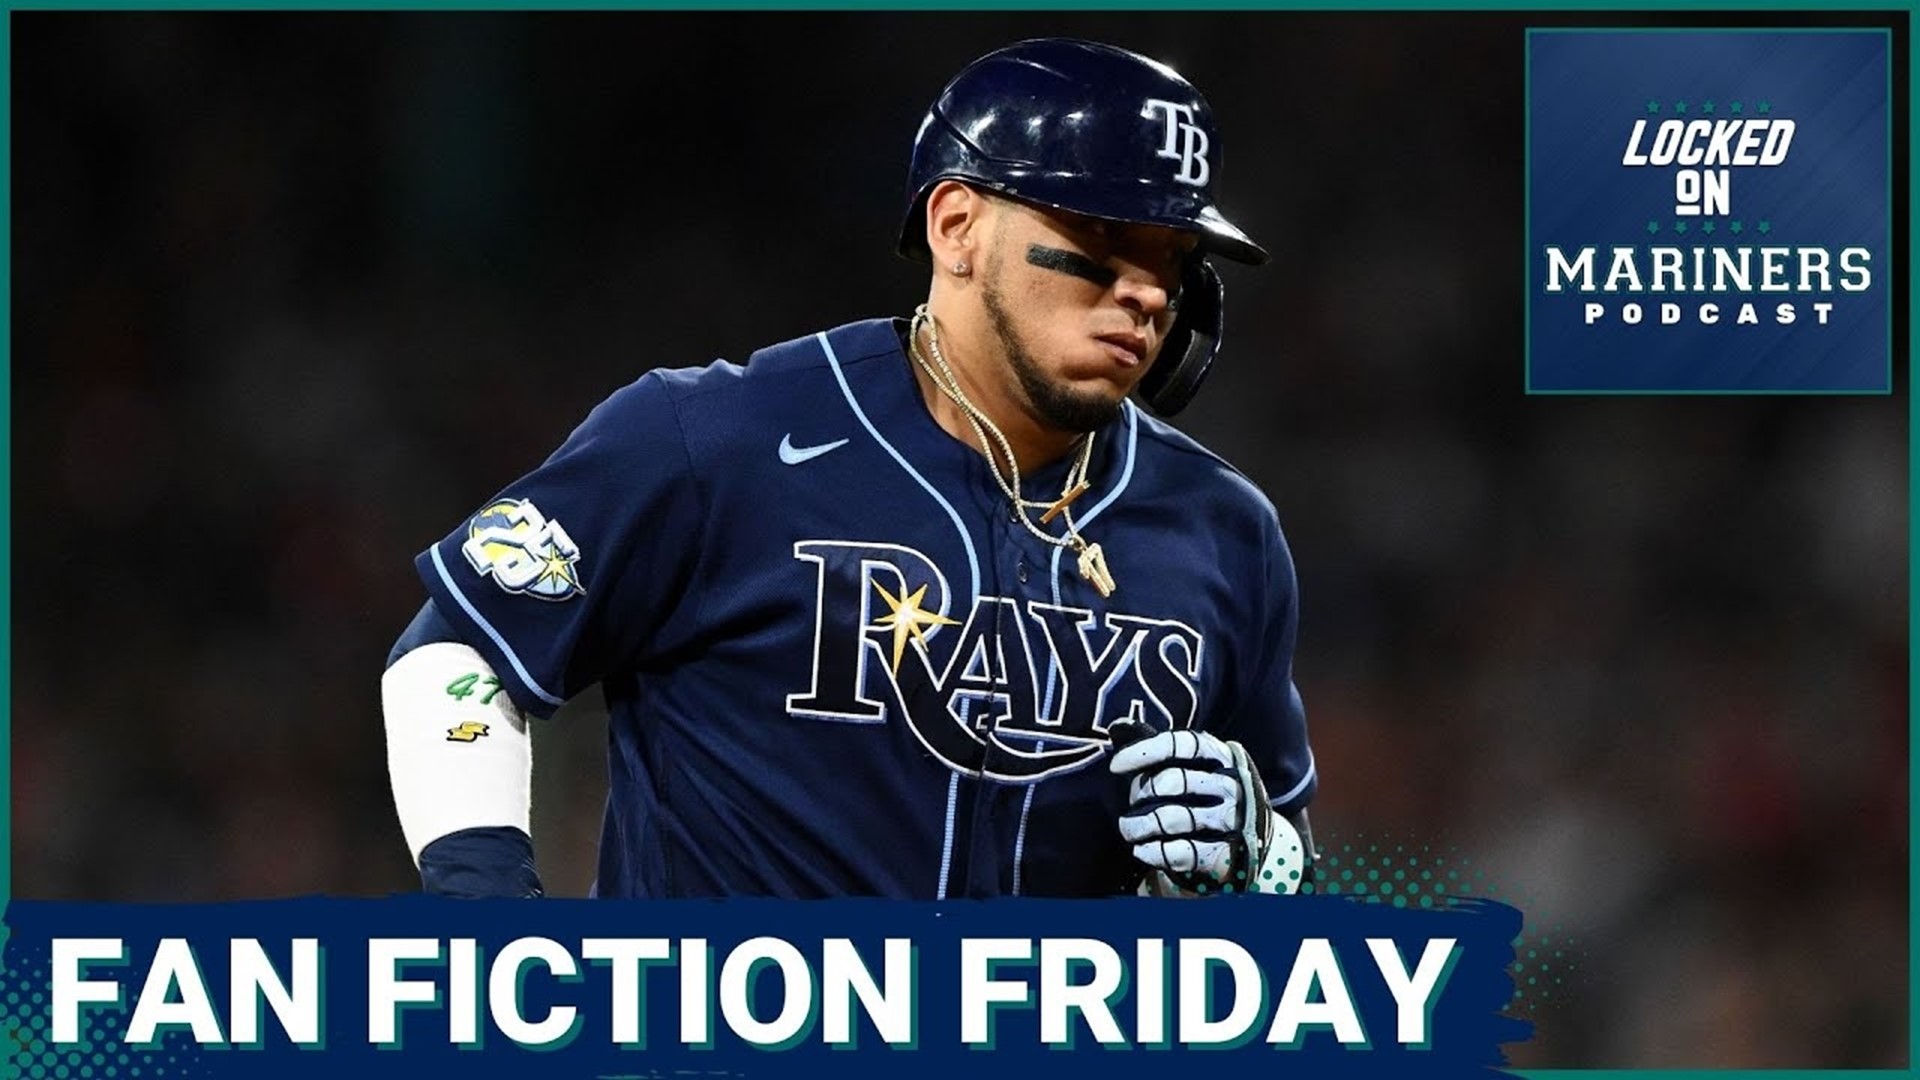 Fan Fiction Friday is back as Colby and Ty grade Mariners trade proposals from fans, including deals for Brent Rooker, Luis Rengifo, Isaac Paredes, and more.